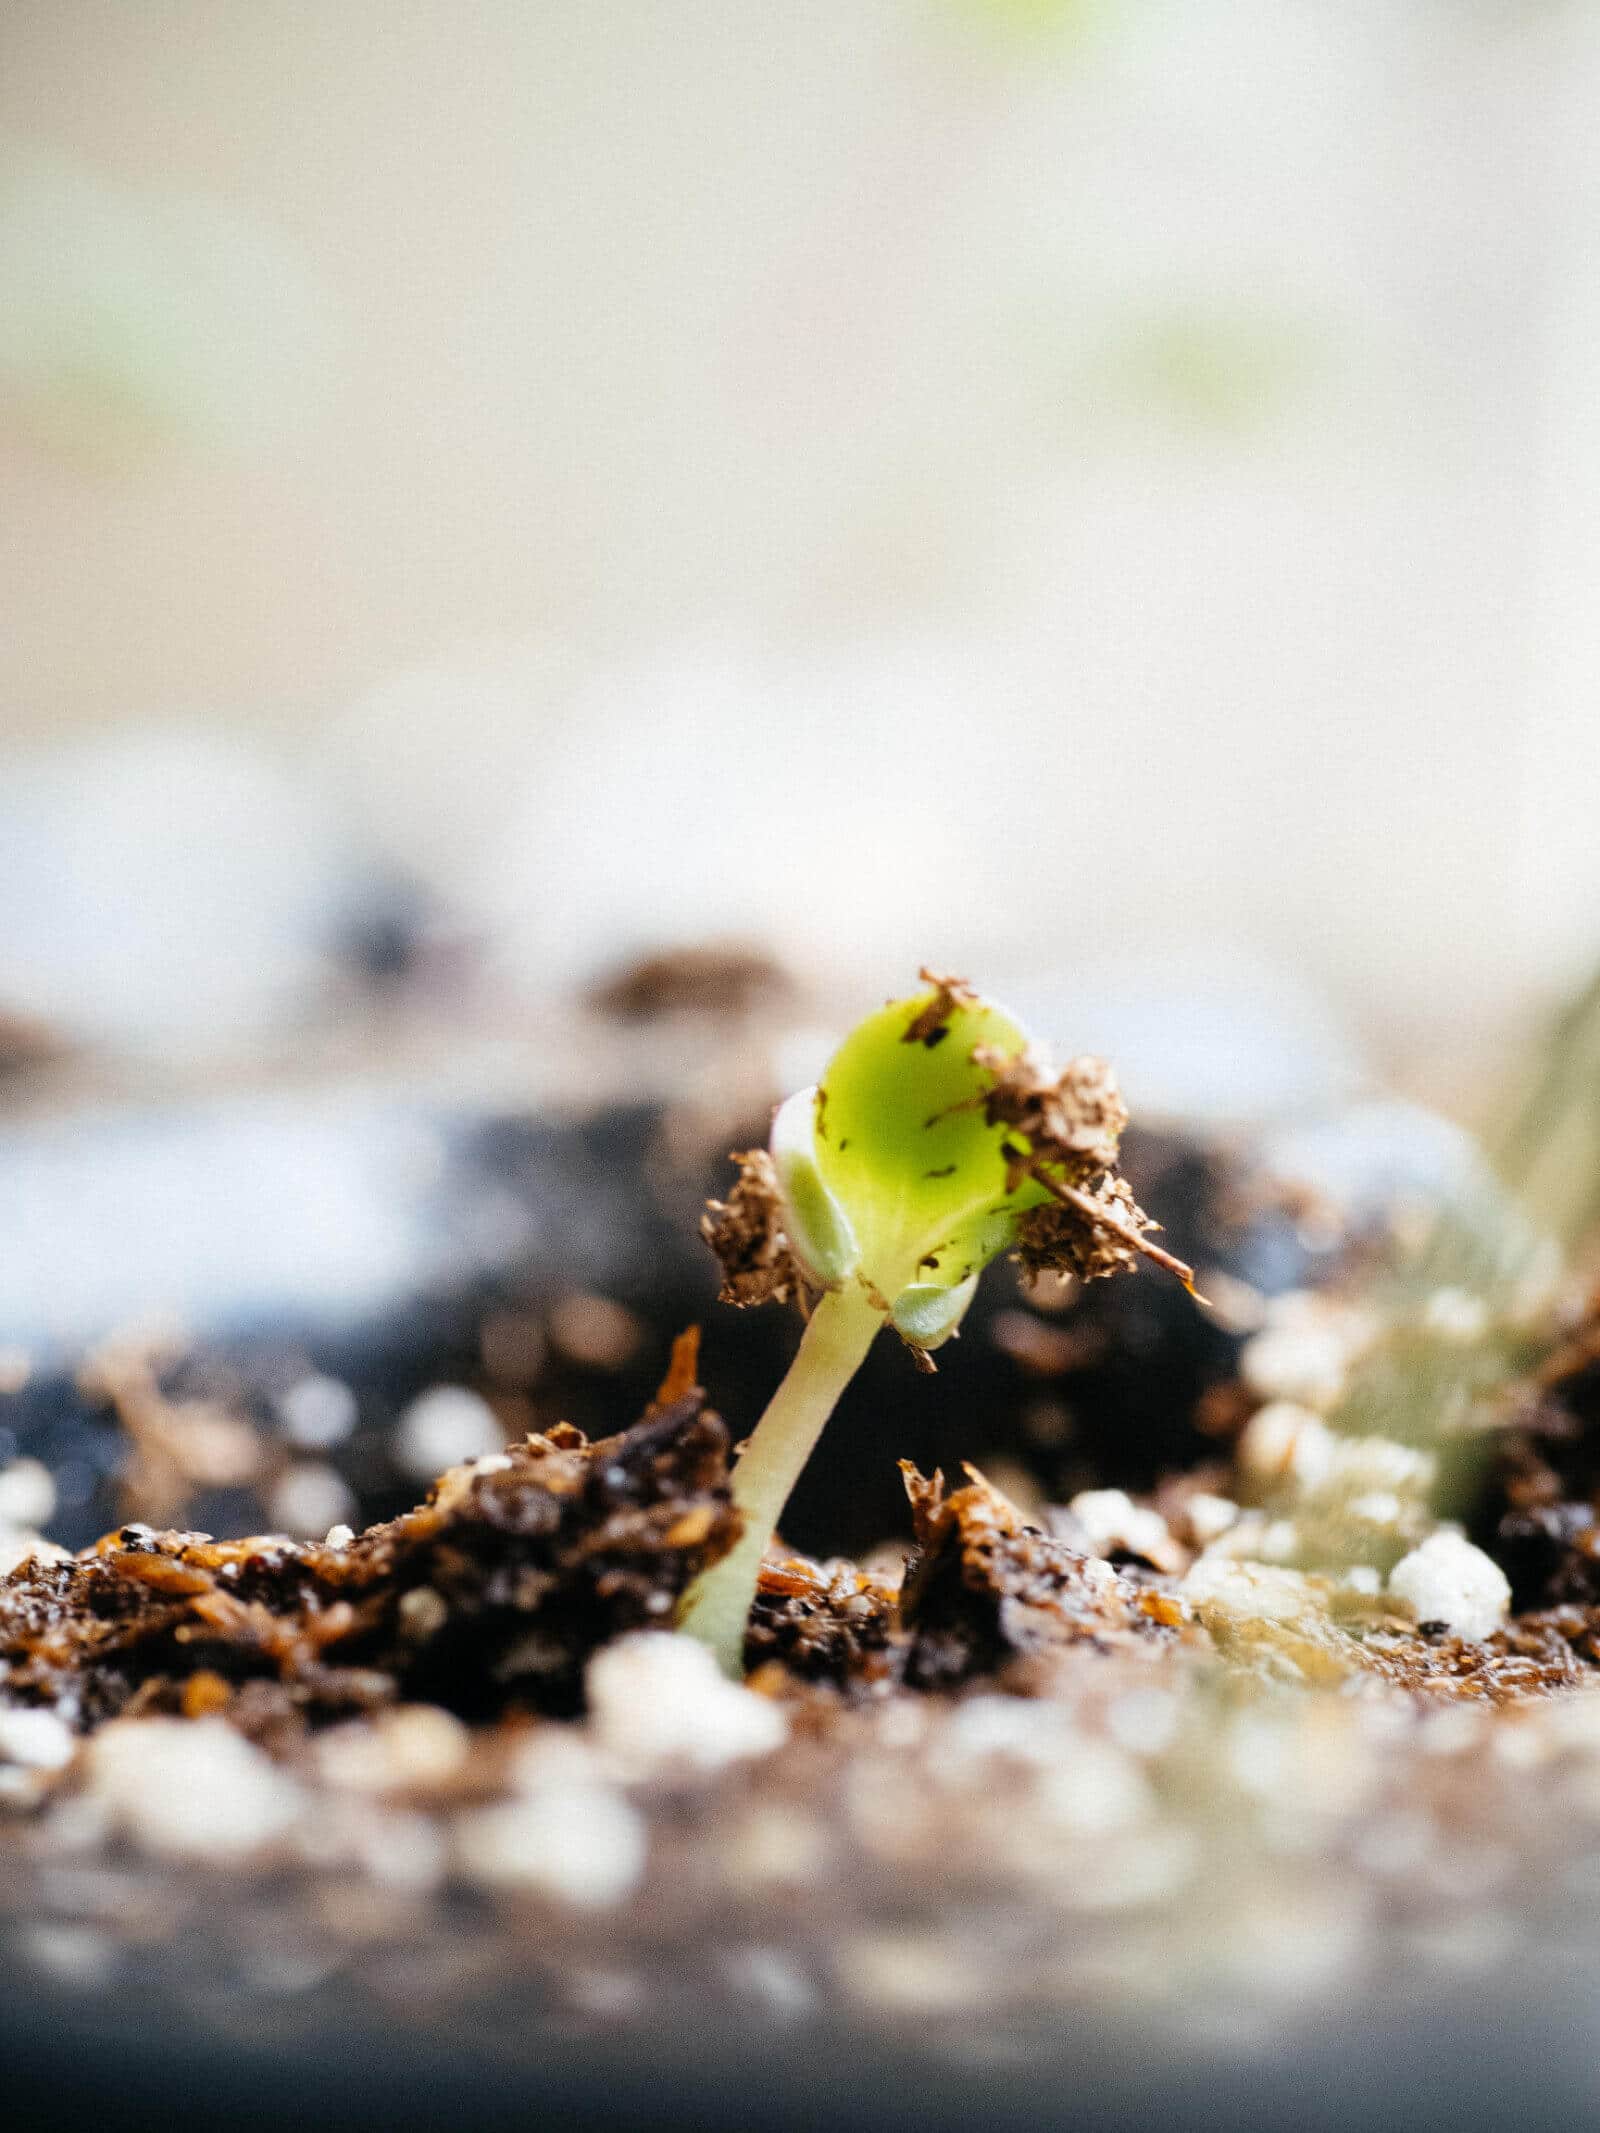 One-day-old seedling